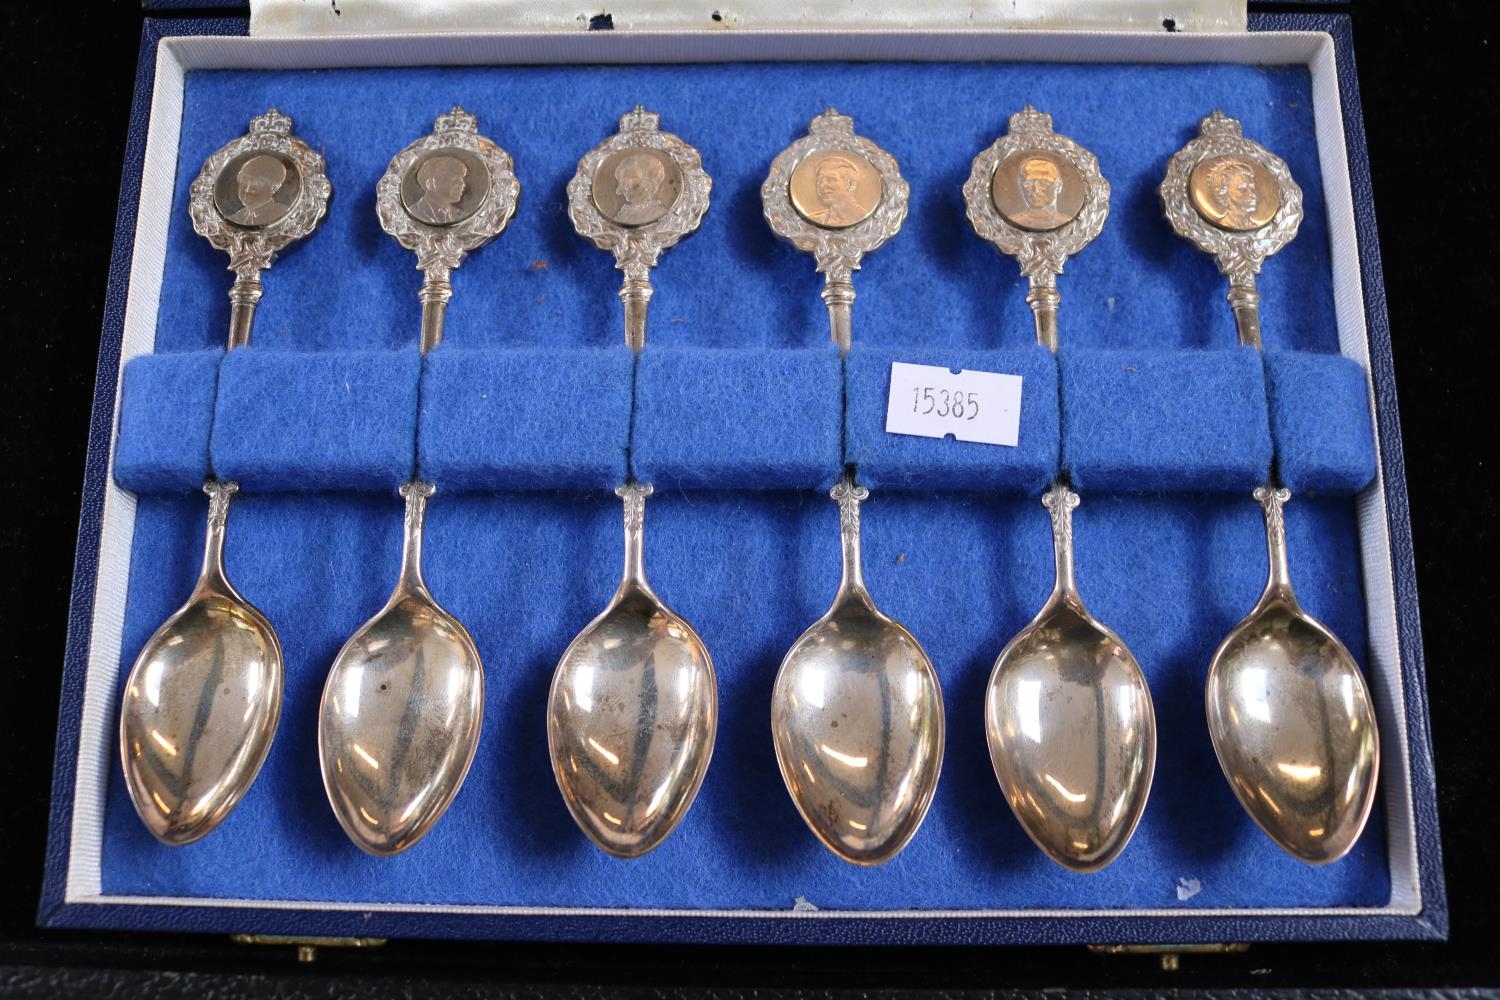 1947 - 1972 Boxed Set of The Royal Spoons 1 of 2500 sets produced in Silver dated 1972 189g total